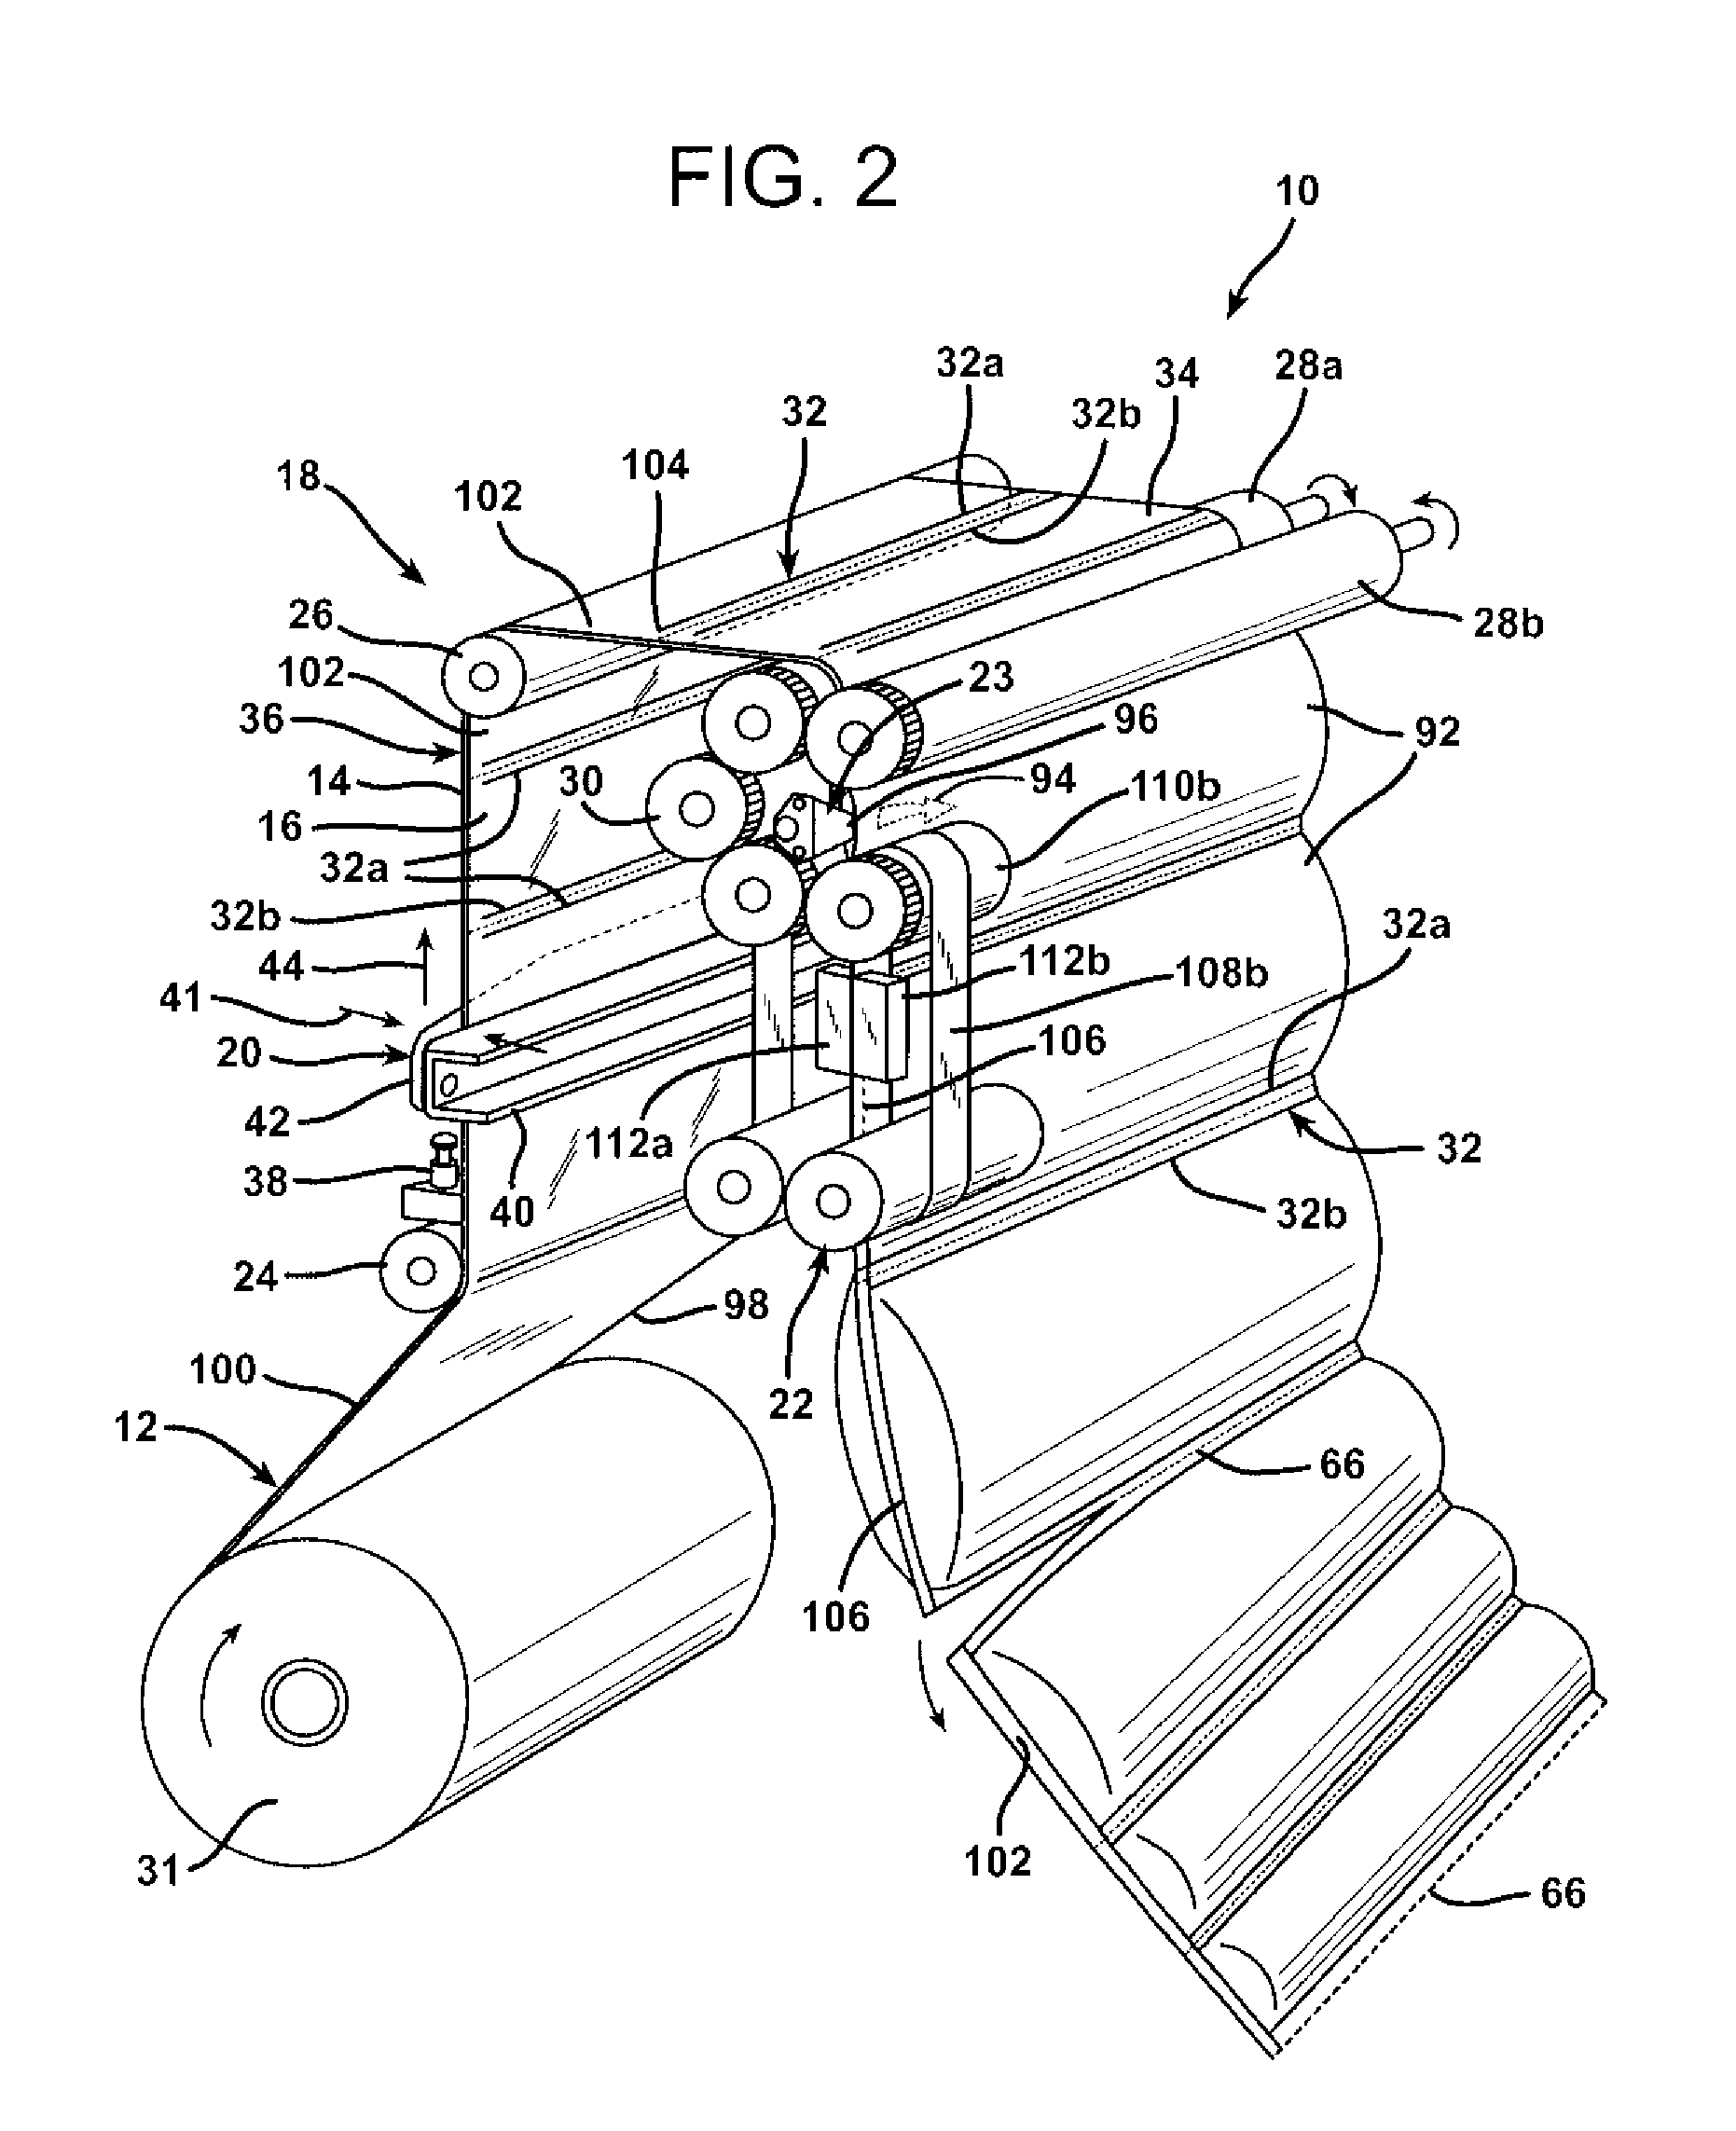 Apparatus and Method for Forming Inflated Containers